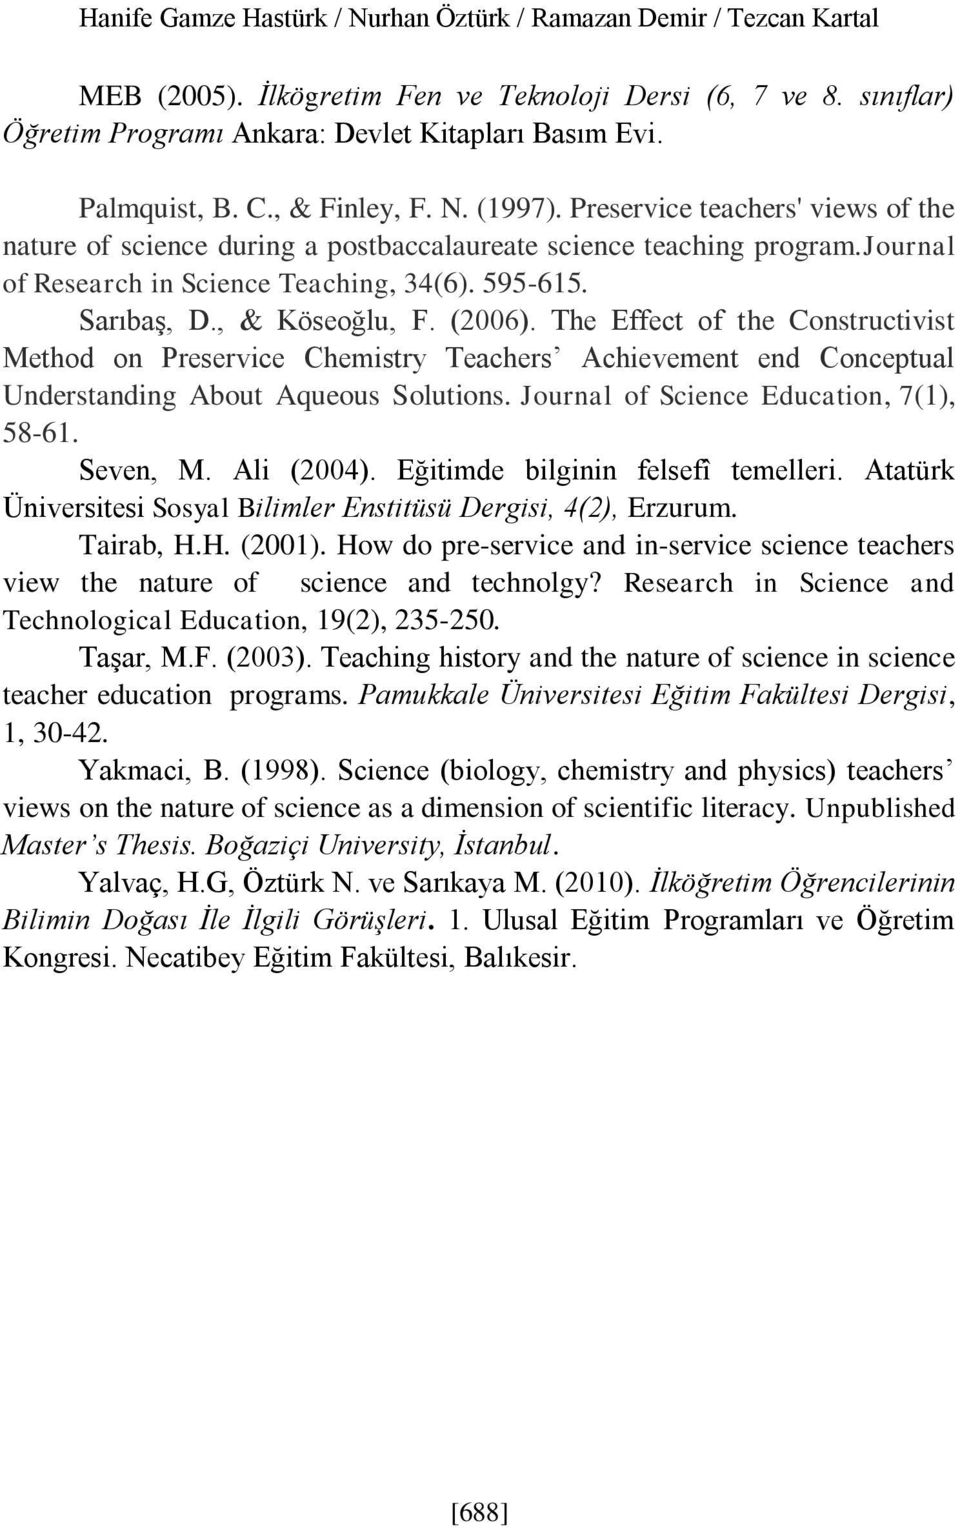 , & Köseoğlu, F. (26). The ffect of the onstructivist Method on Preservice hemistry Teachers chievement end onceptual Understanding bout queous Solutions. Journal of Science ducation, 7(1), 58-61.